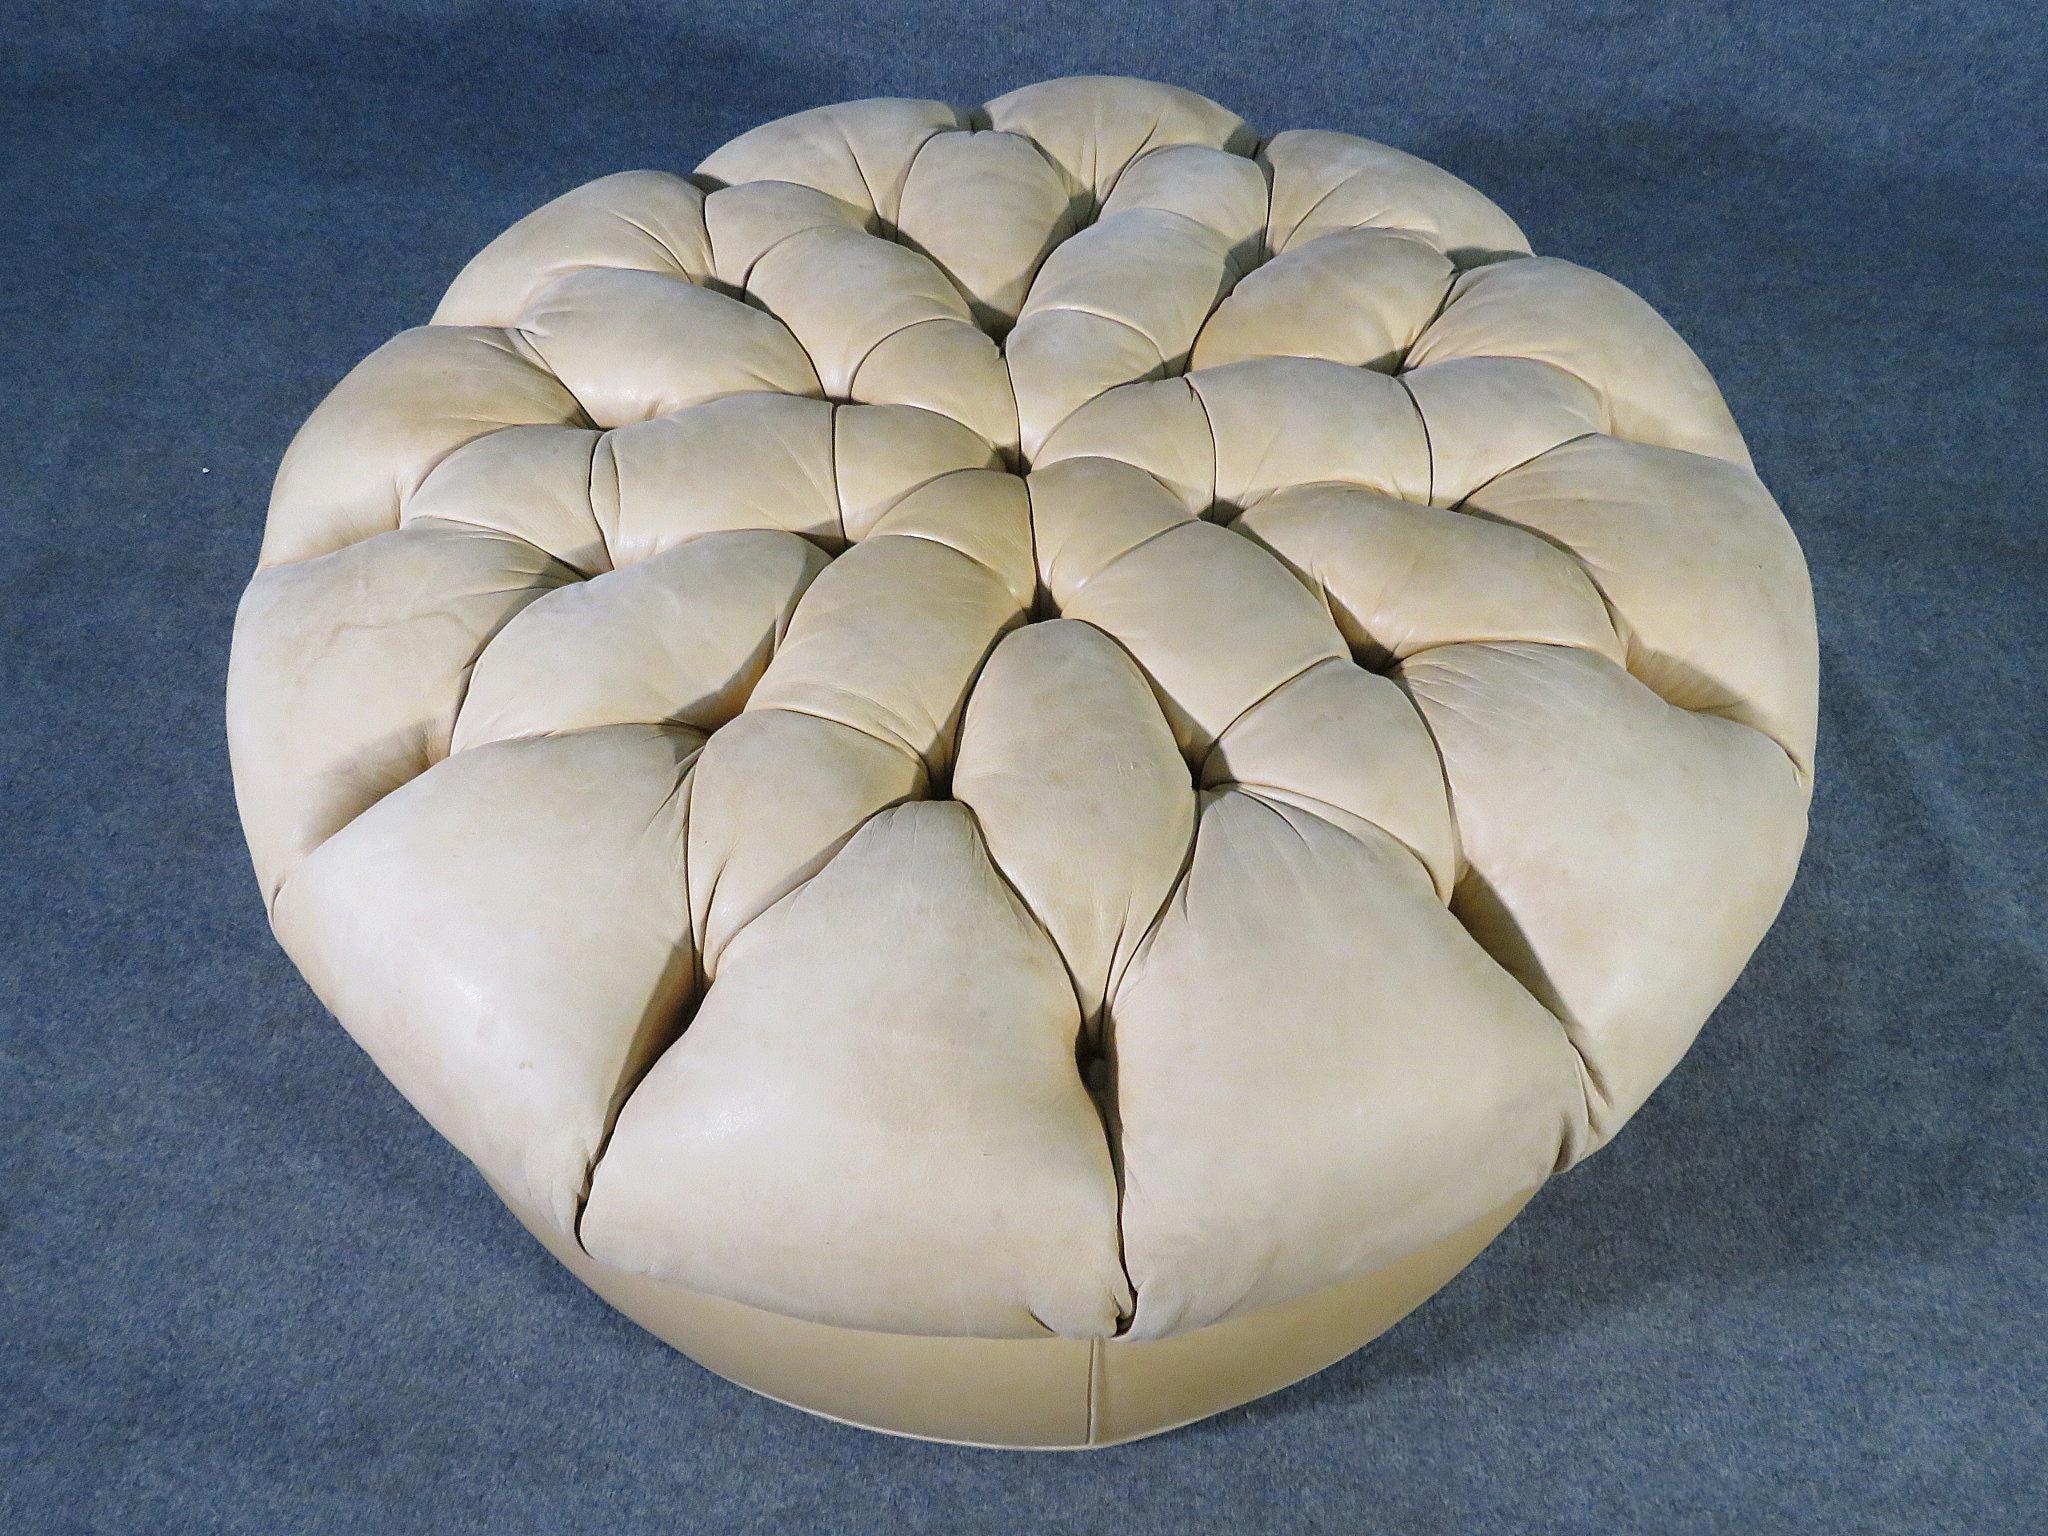 Round ottoman with tufted leather.
(Please confirm item location - NY or NJ - with dealer).
 